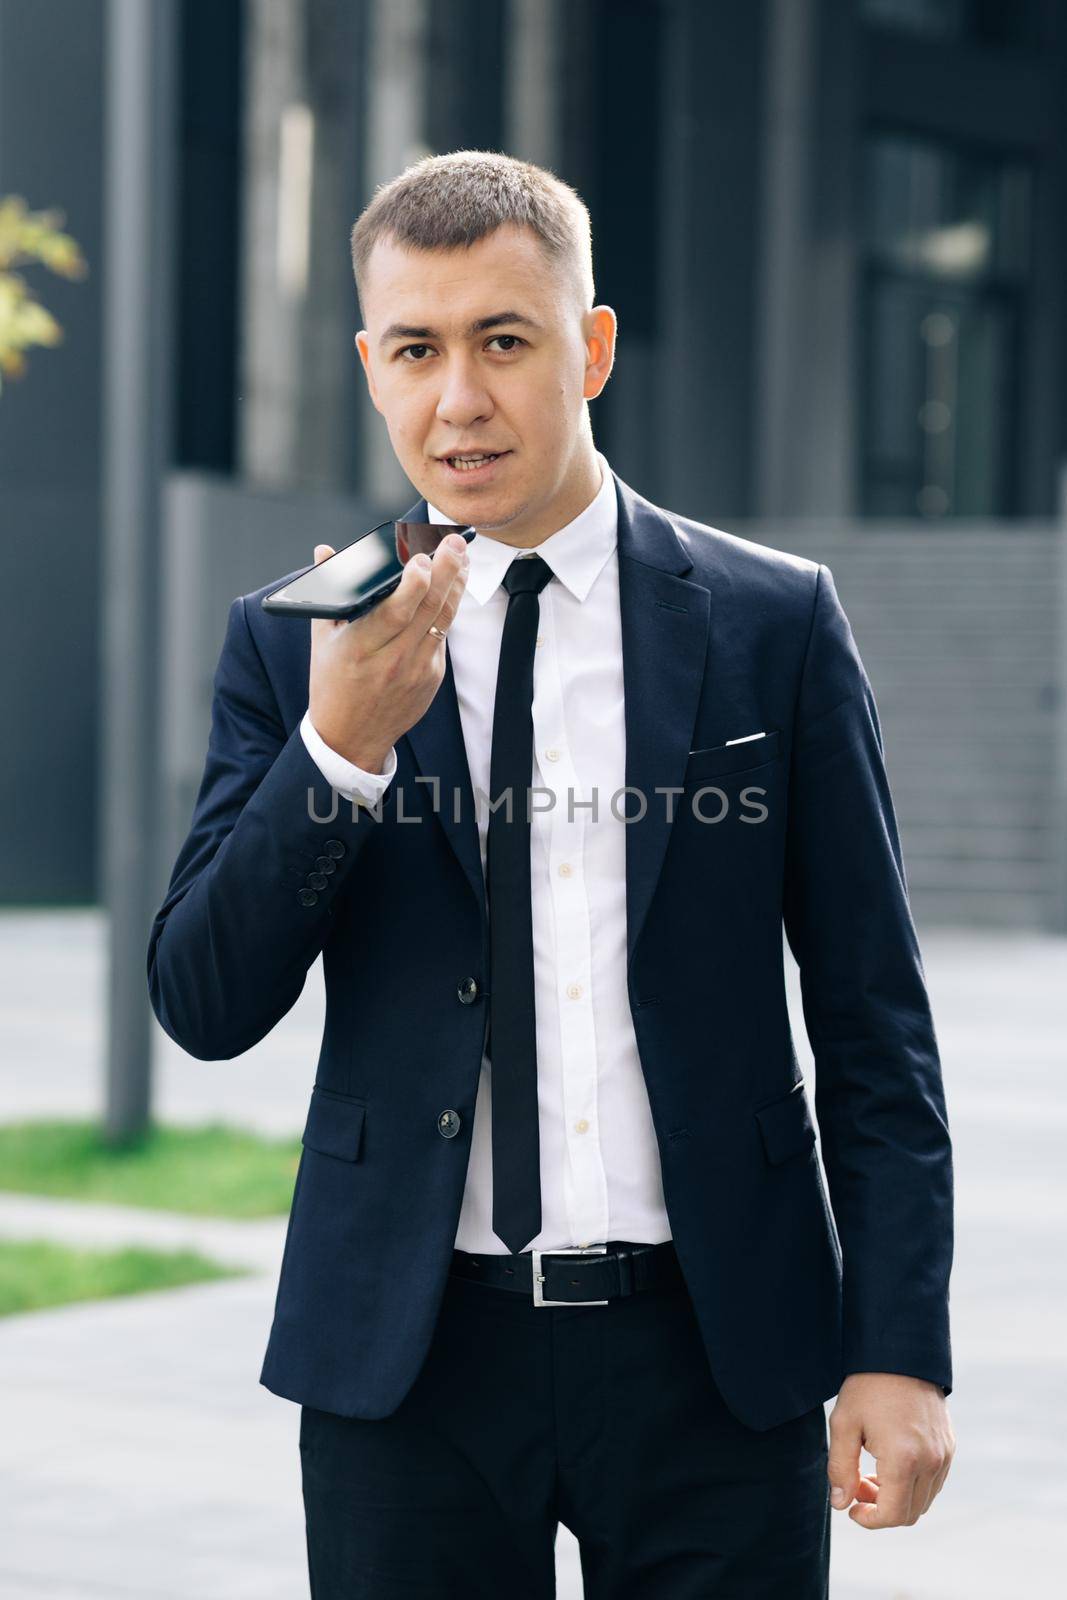 Businessman use smartphone to send voice messages outdoors at downtown. Young business man talking on phone near modern office building.